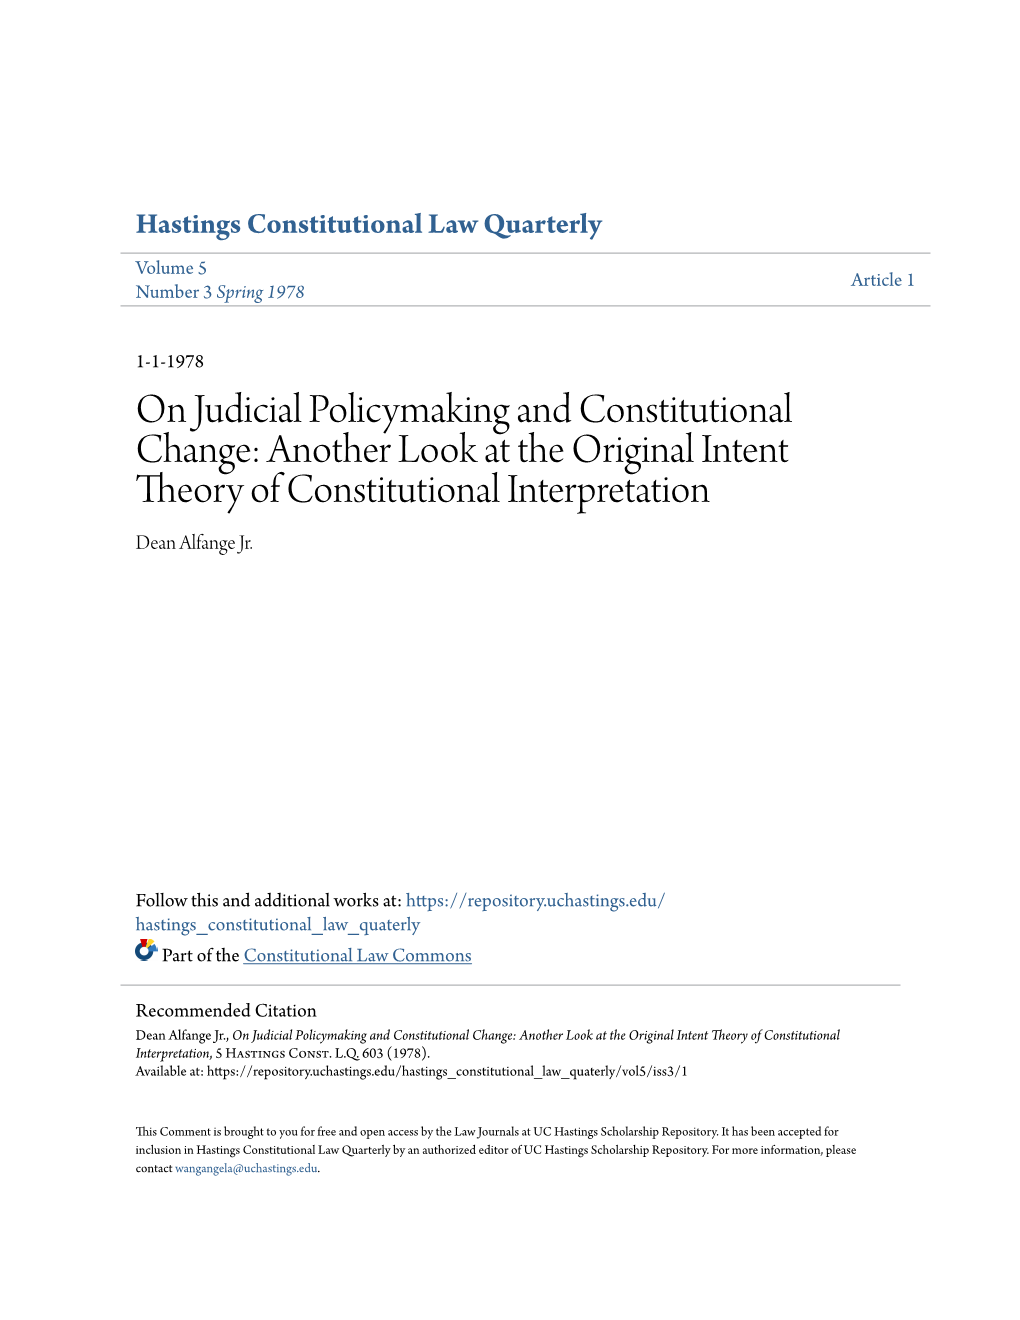 Another Look at the Original Intent Theory of Constitutional Interpretation Dean Alfange Jr